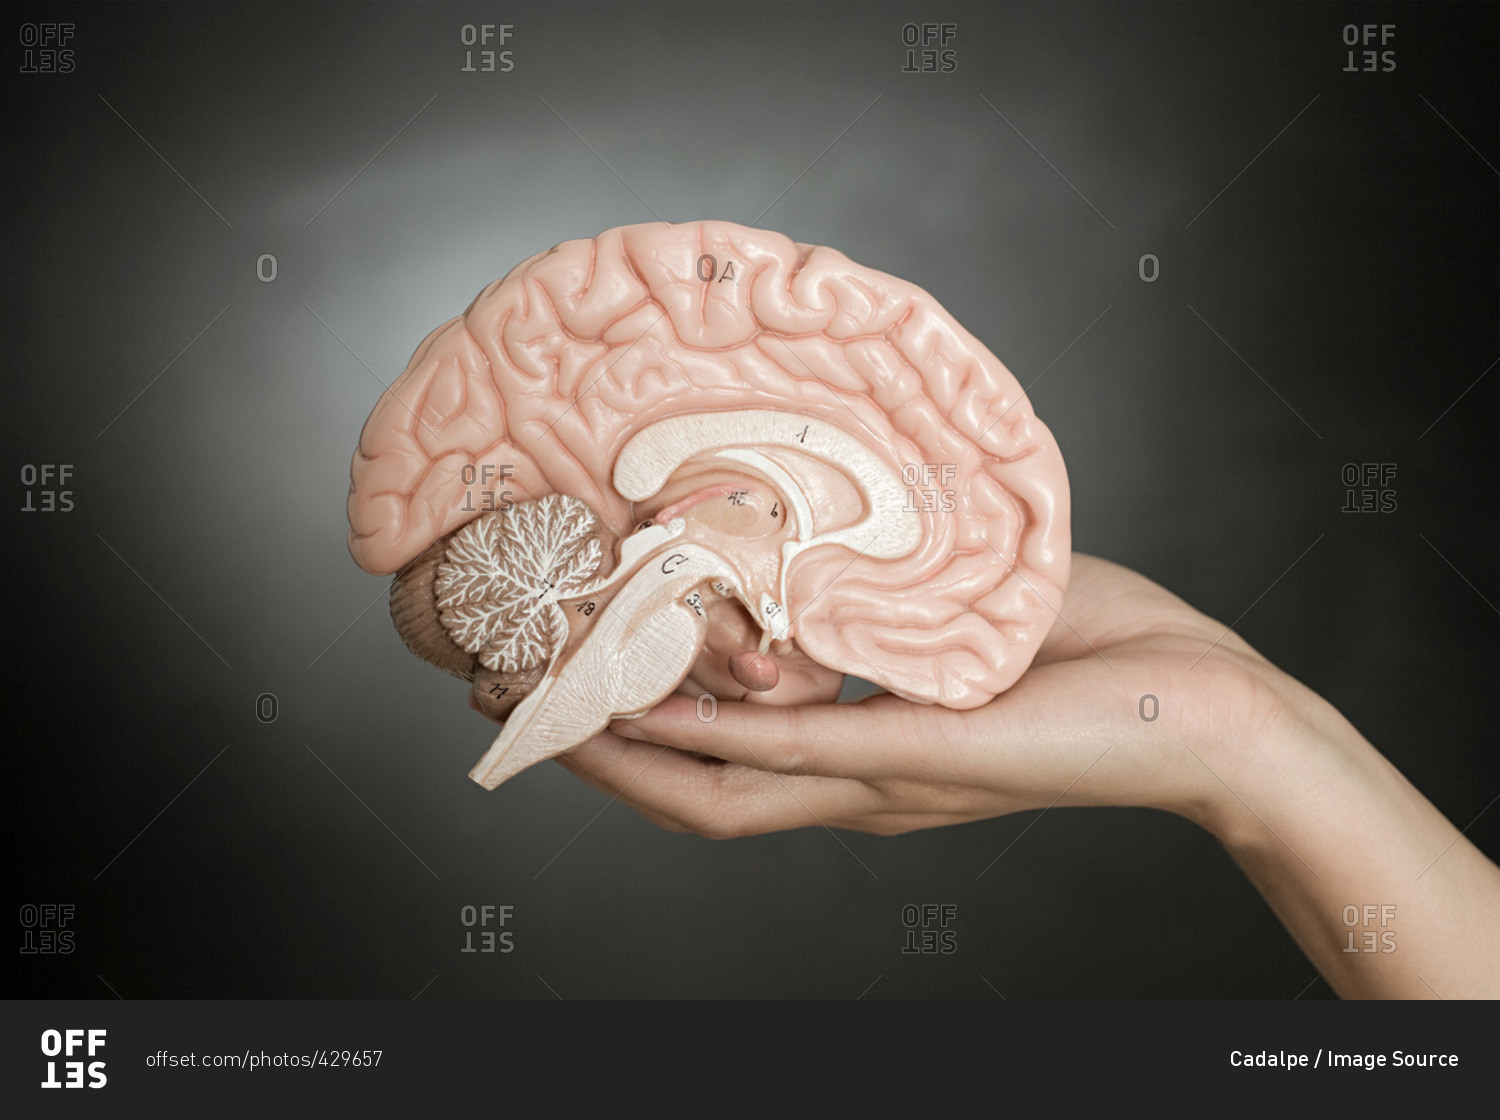 Person holding a model brain